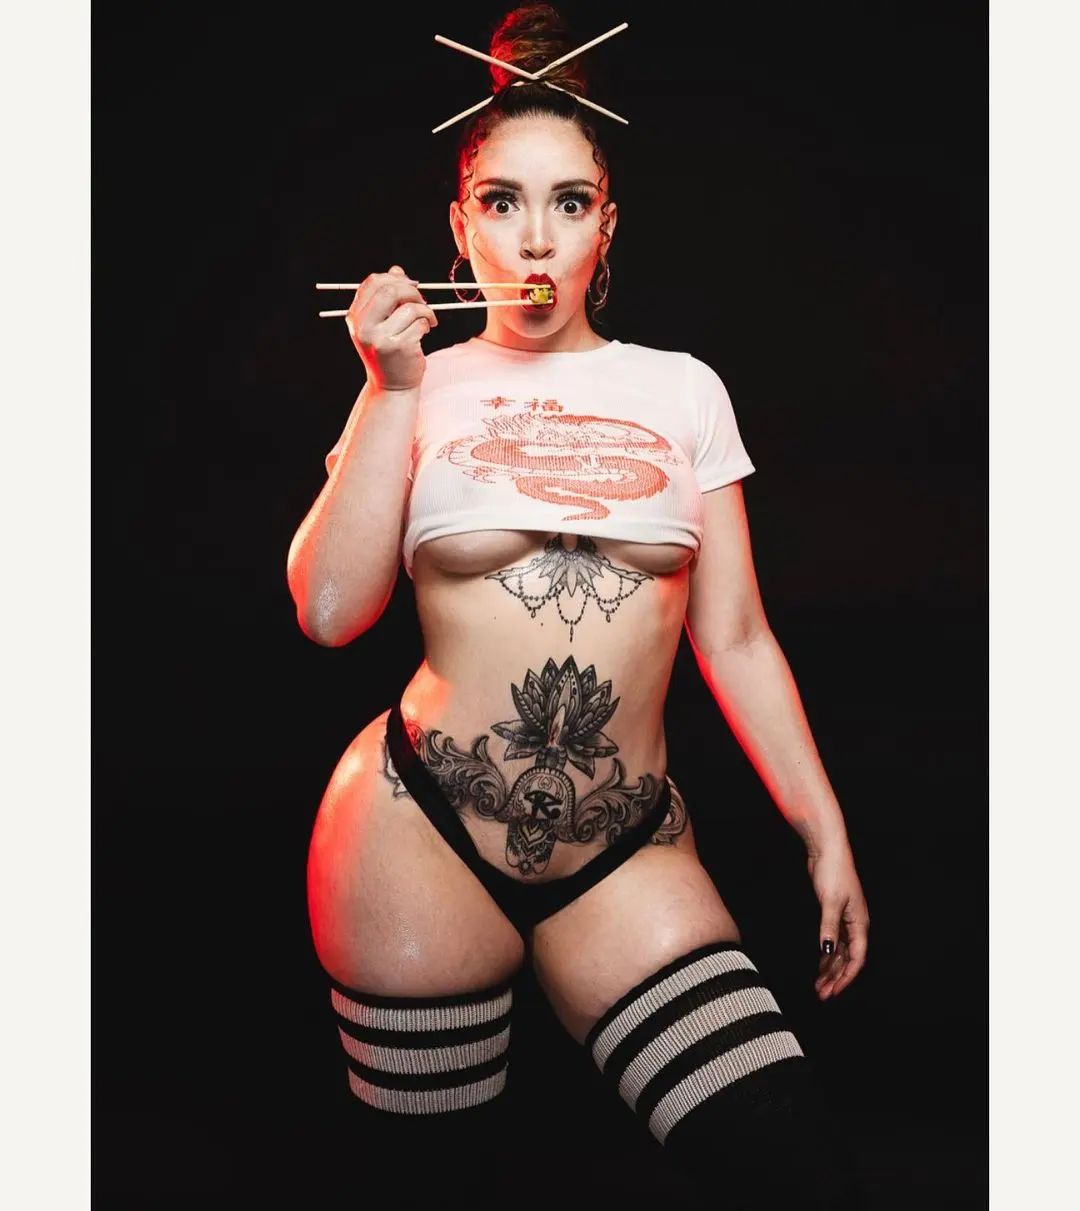 Aaye!!#classicmaterial with @theonlylexiblow2 #followher #inkcandy image by @pdphotoyork